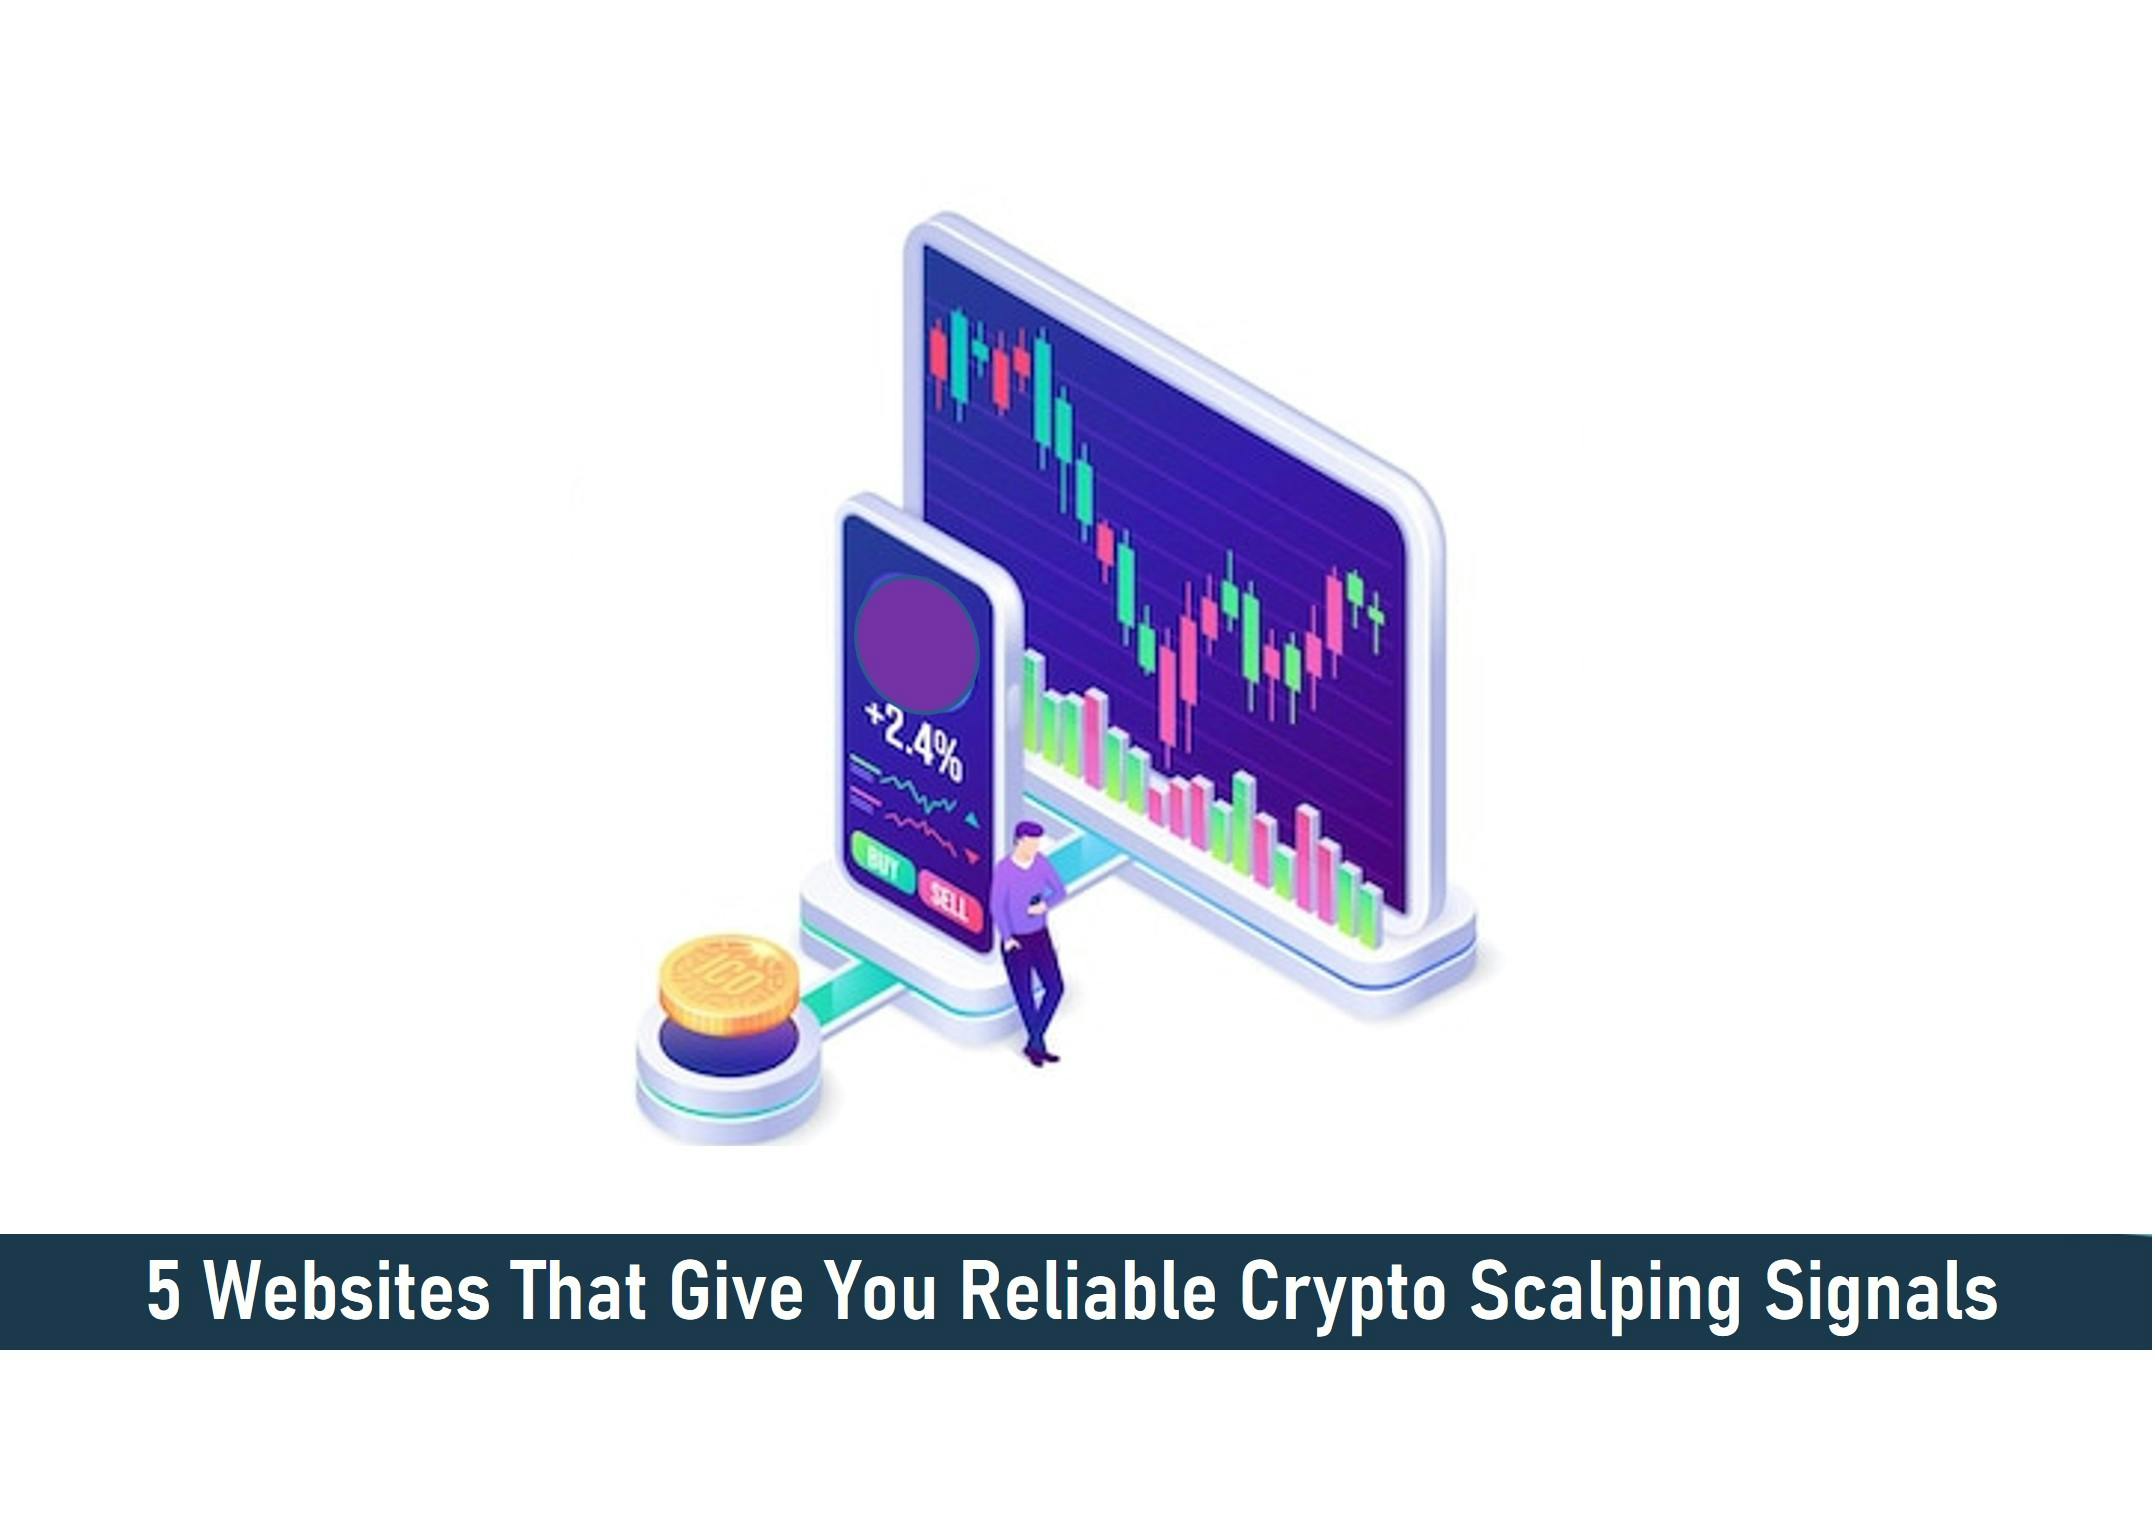 5 Websites That Give You Reliable Crypto Scalping Signals